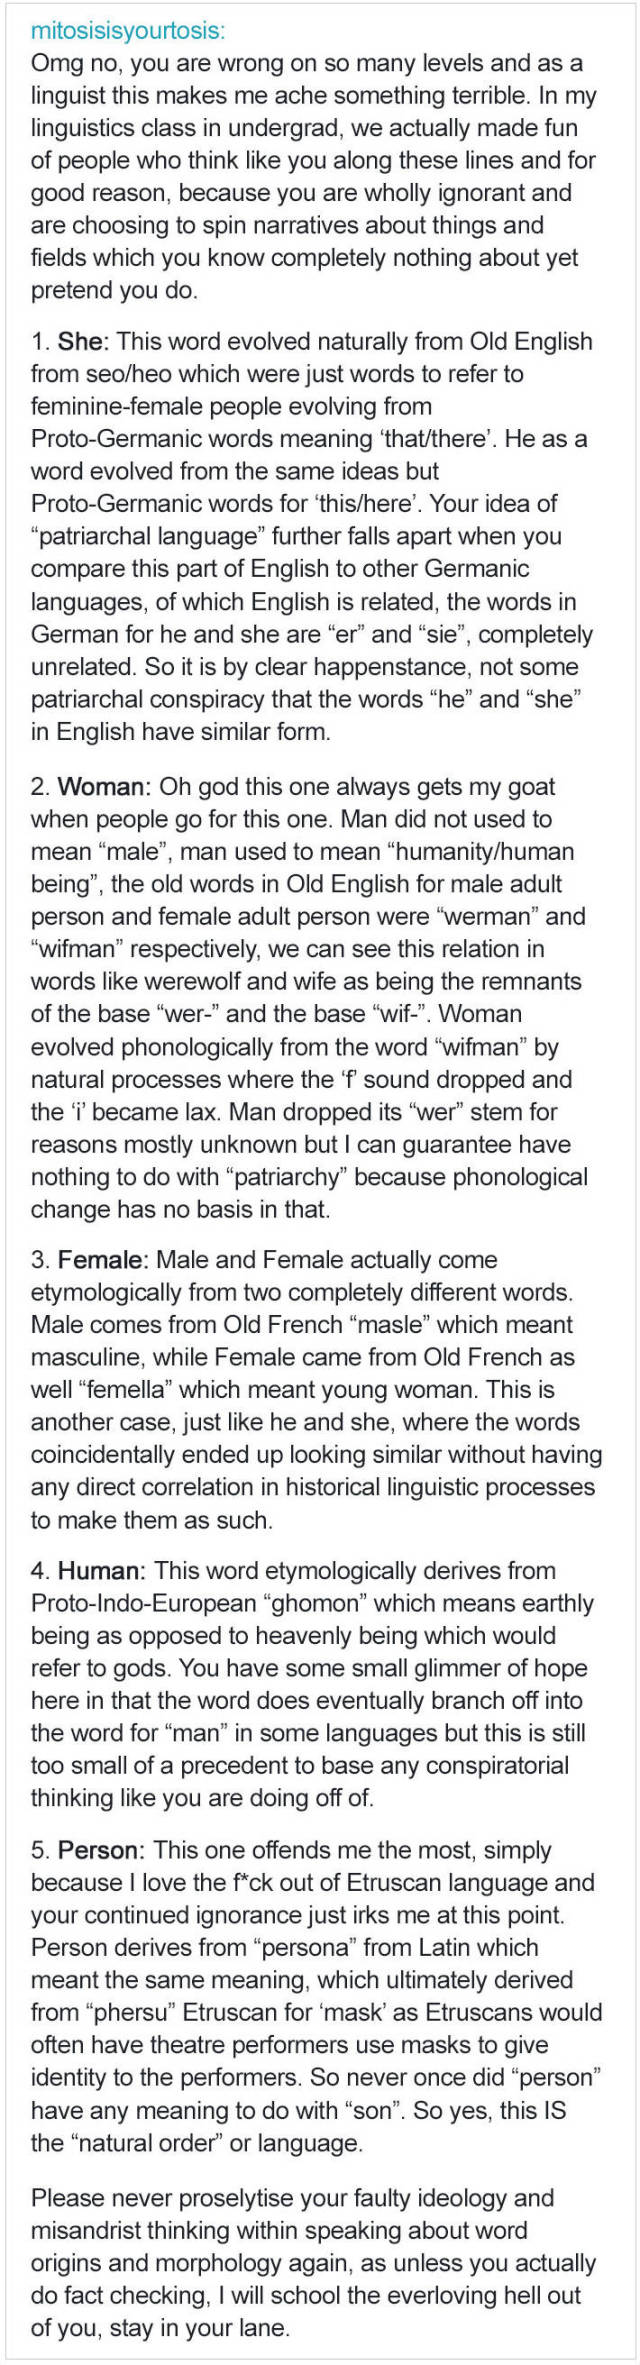 Woman Tried To Attack English Language For Being Sexist, Got Schooled By A Real Linguist